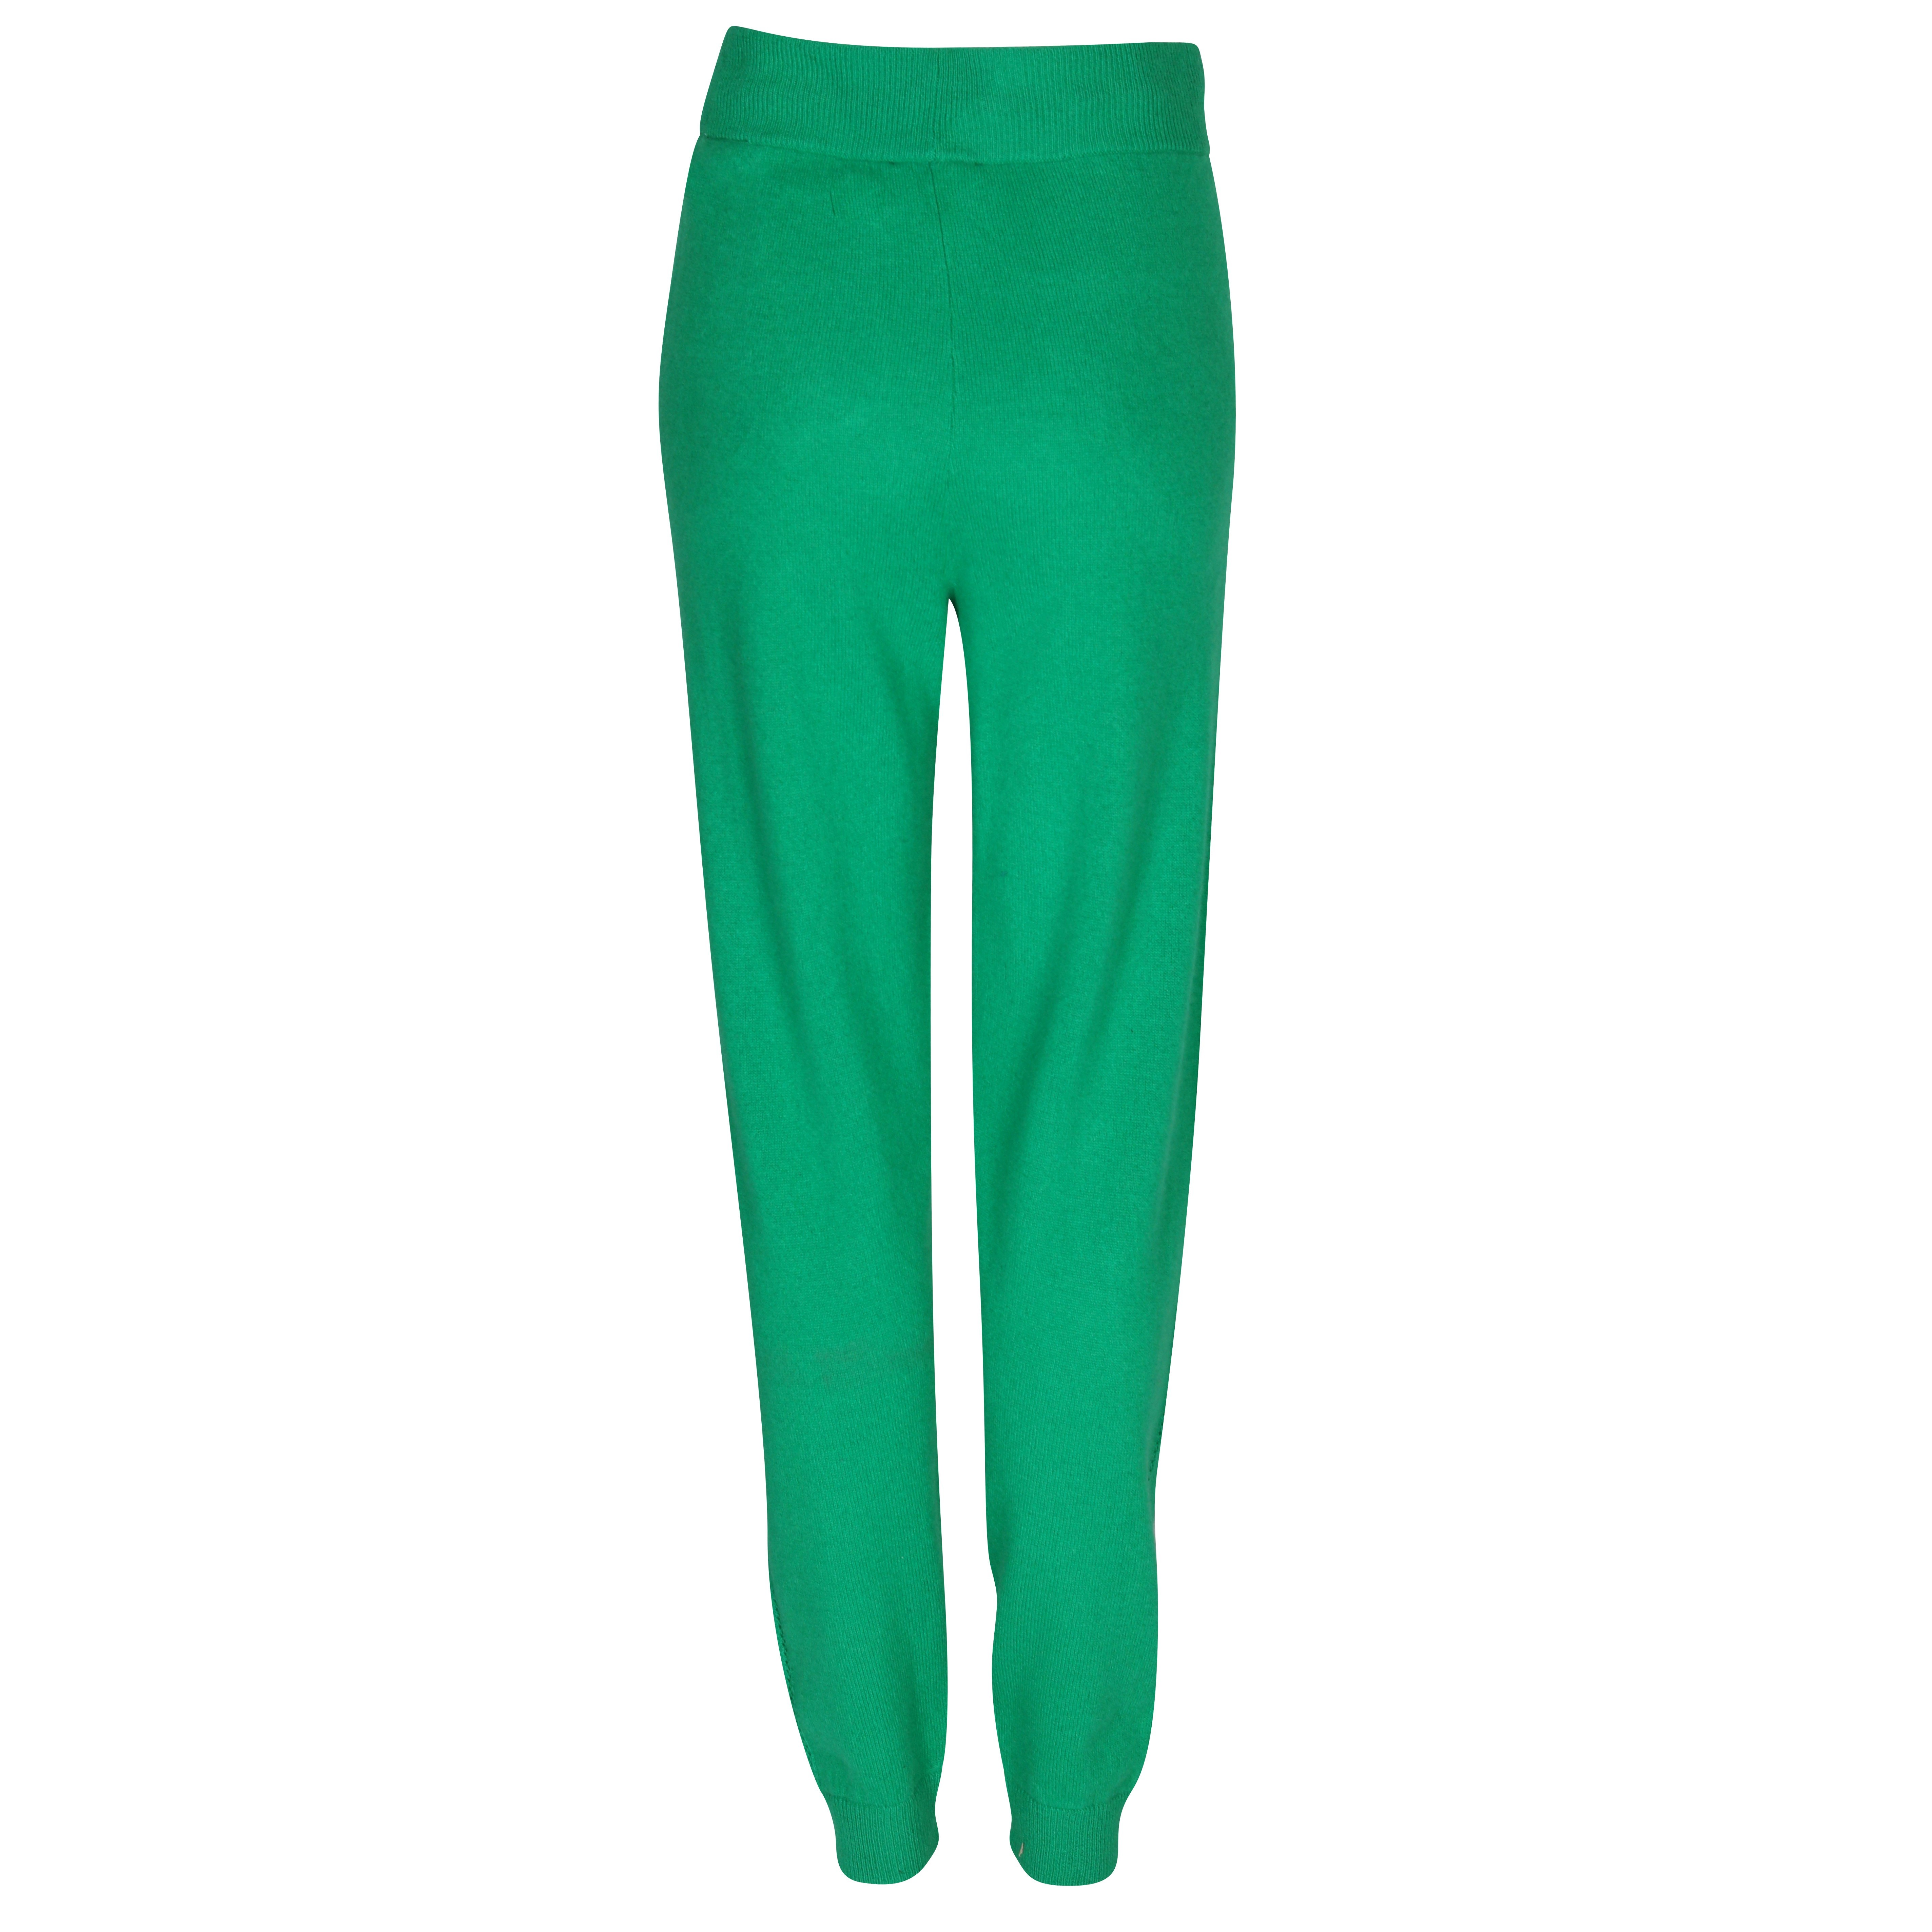 Absolut Cashmere Oliane Jogging Pant in Imperial